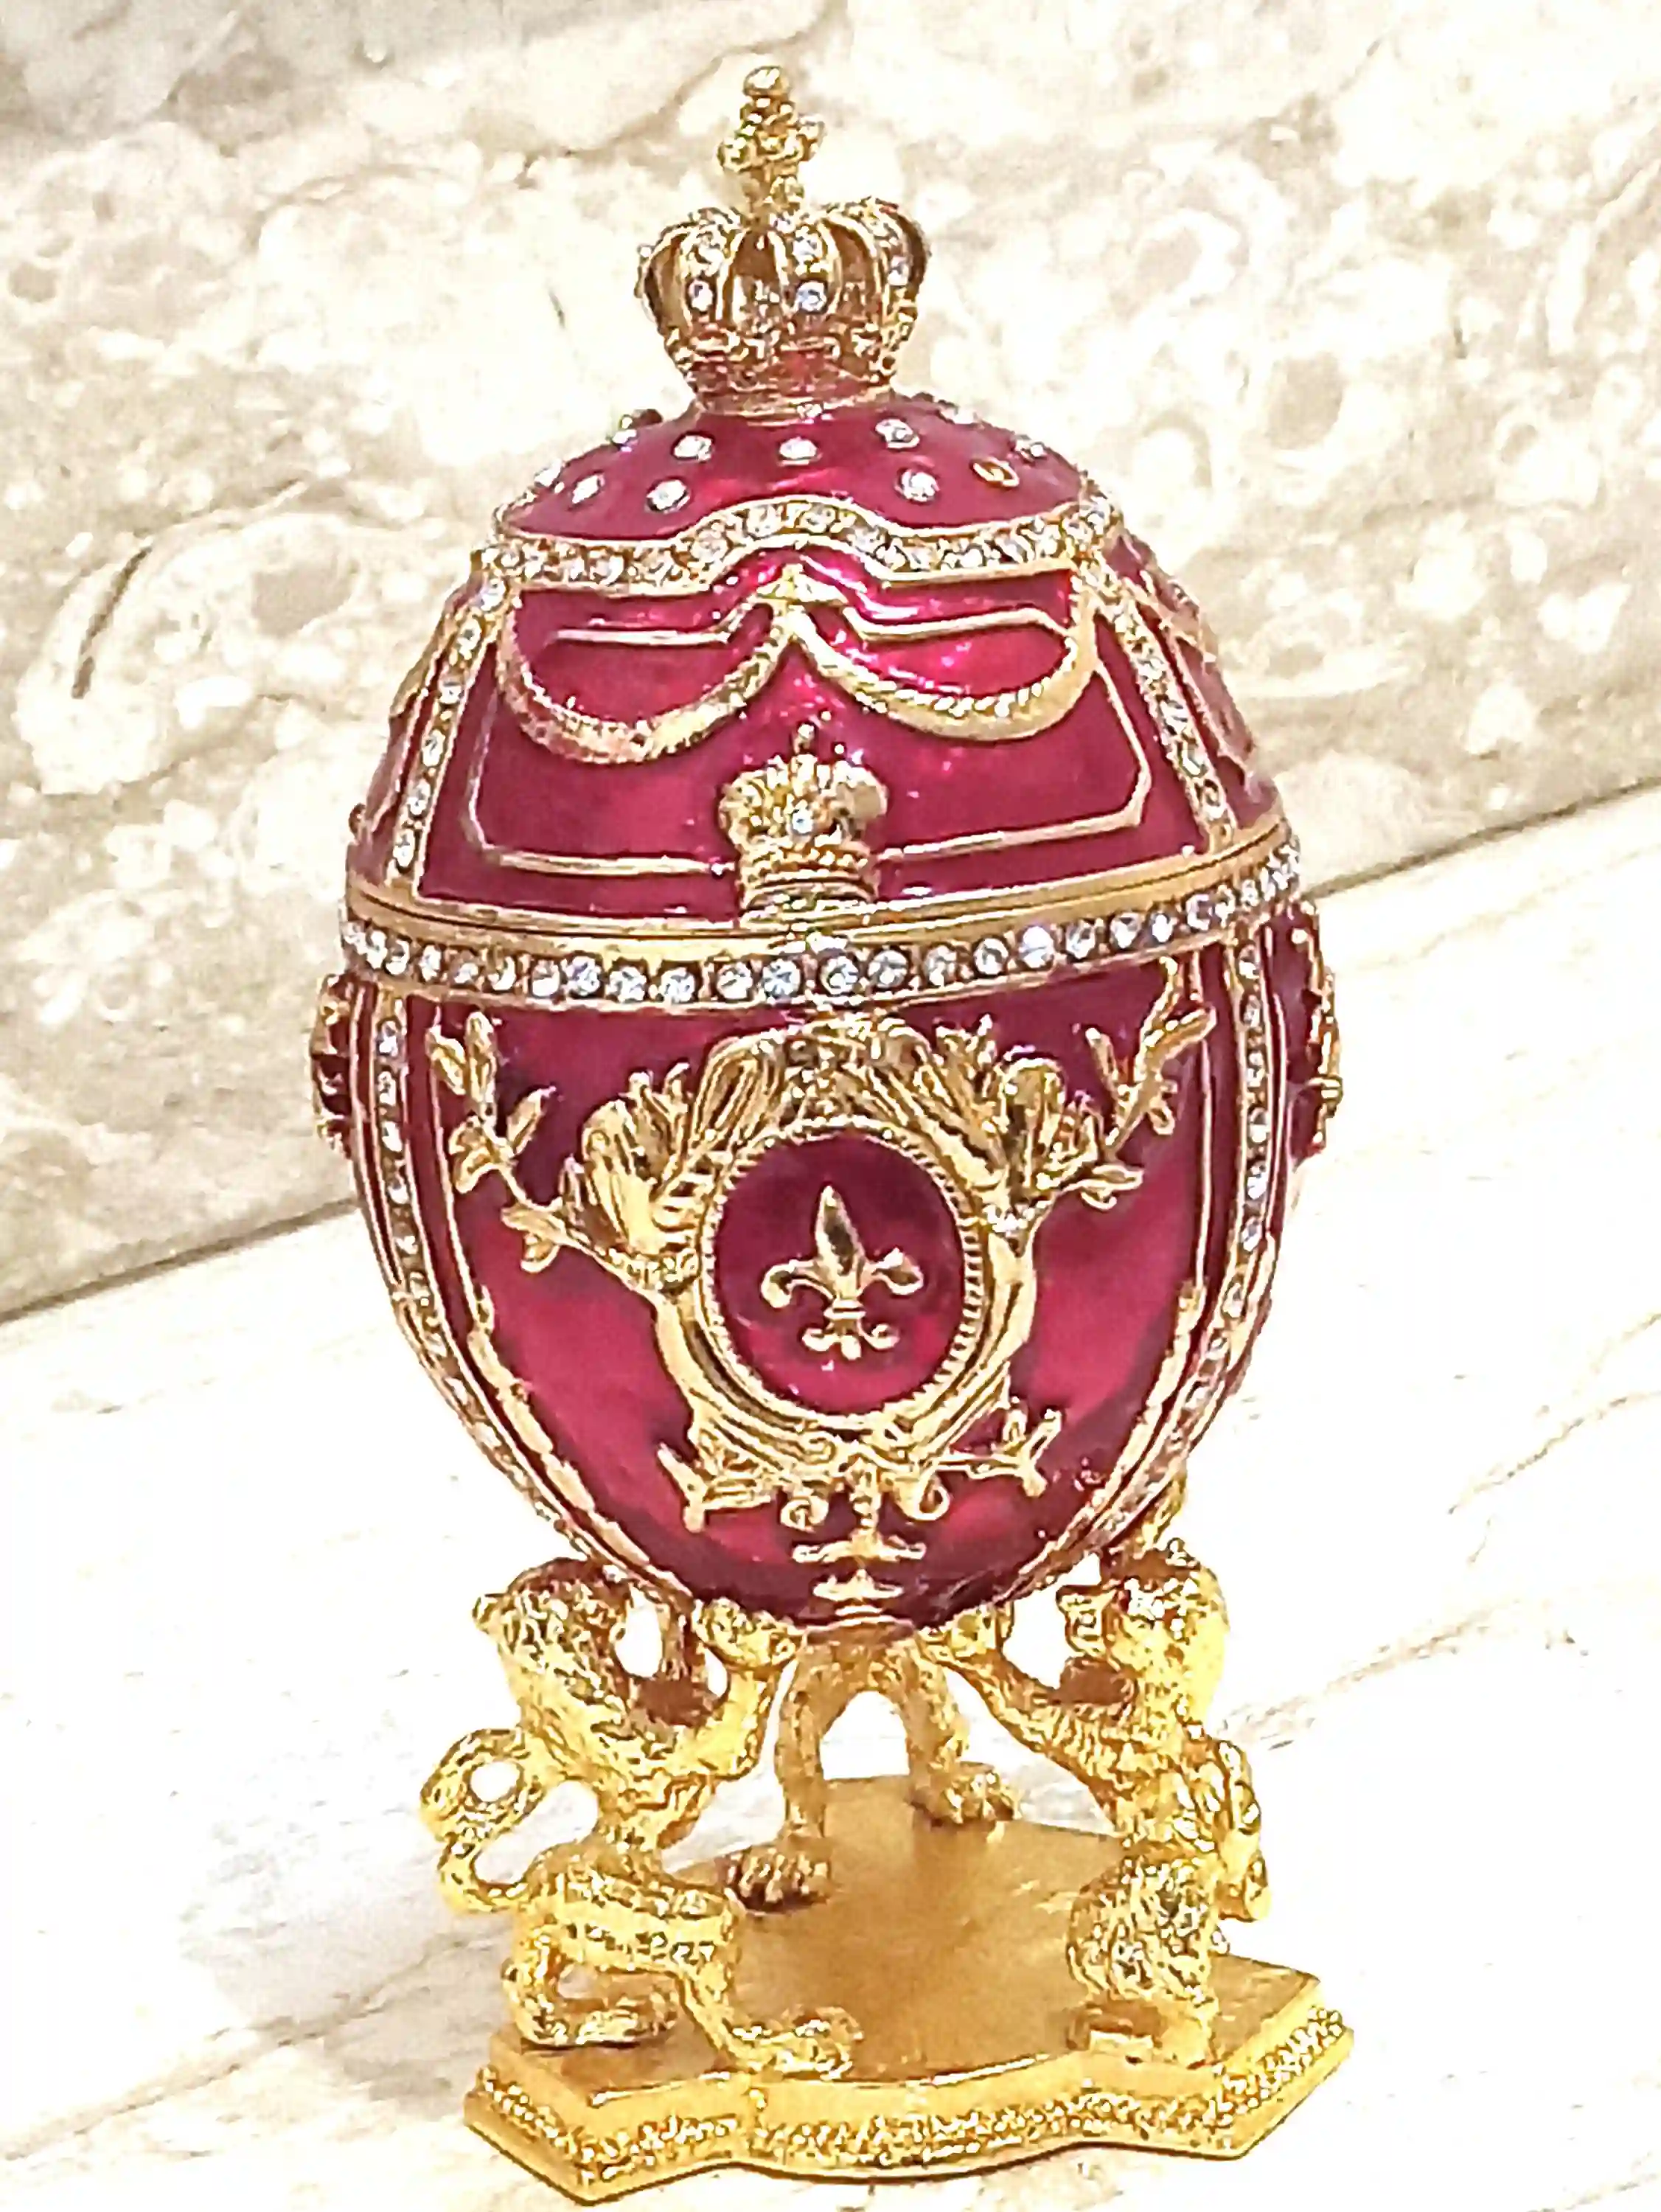 Royal Purple Faberge Egg style 24KGOLD 4ct Collectors Egg Fabrege Jewelry Box Faberge Egg Trinket Box HAND Decorated with 200 Austrian Crys 